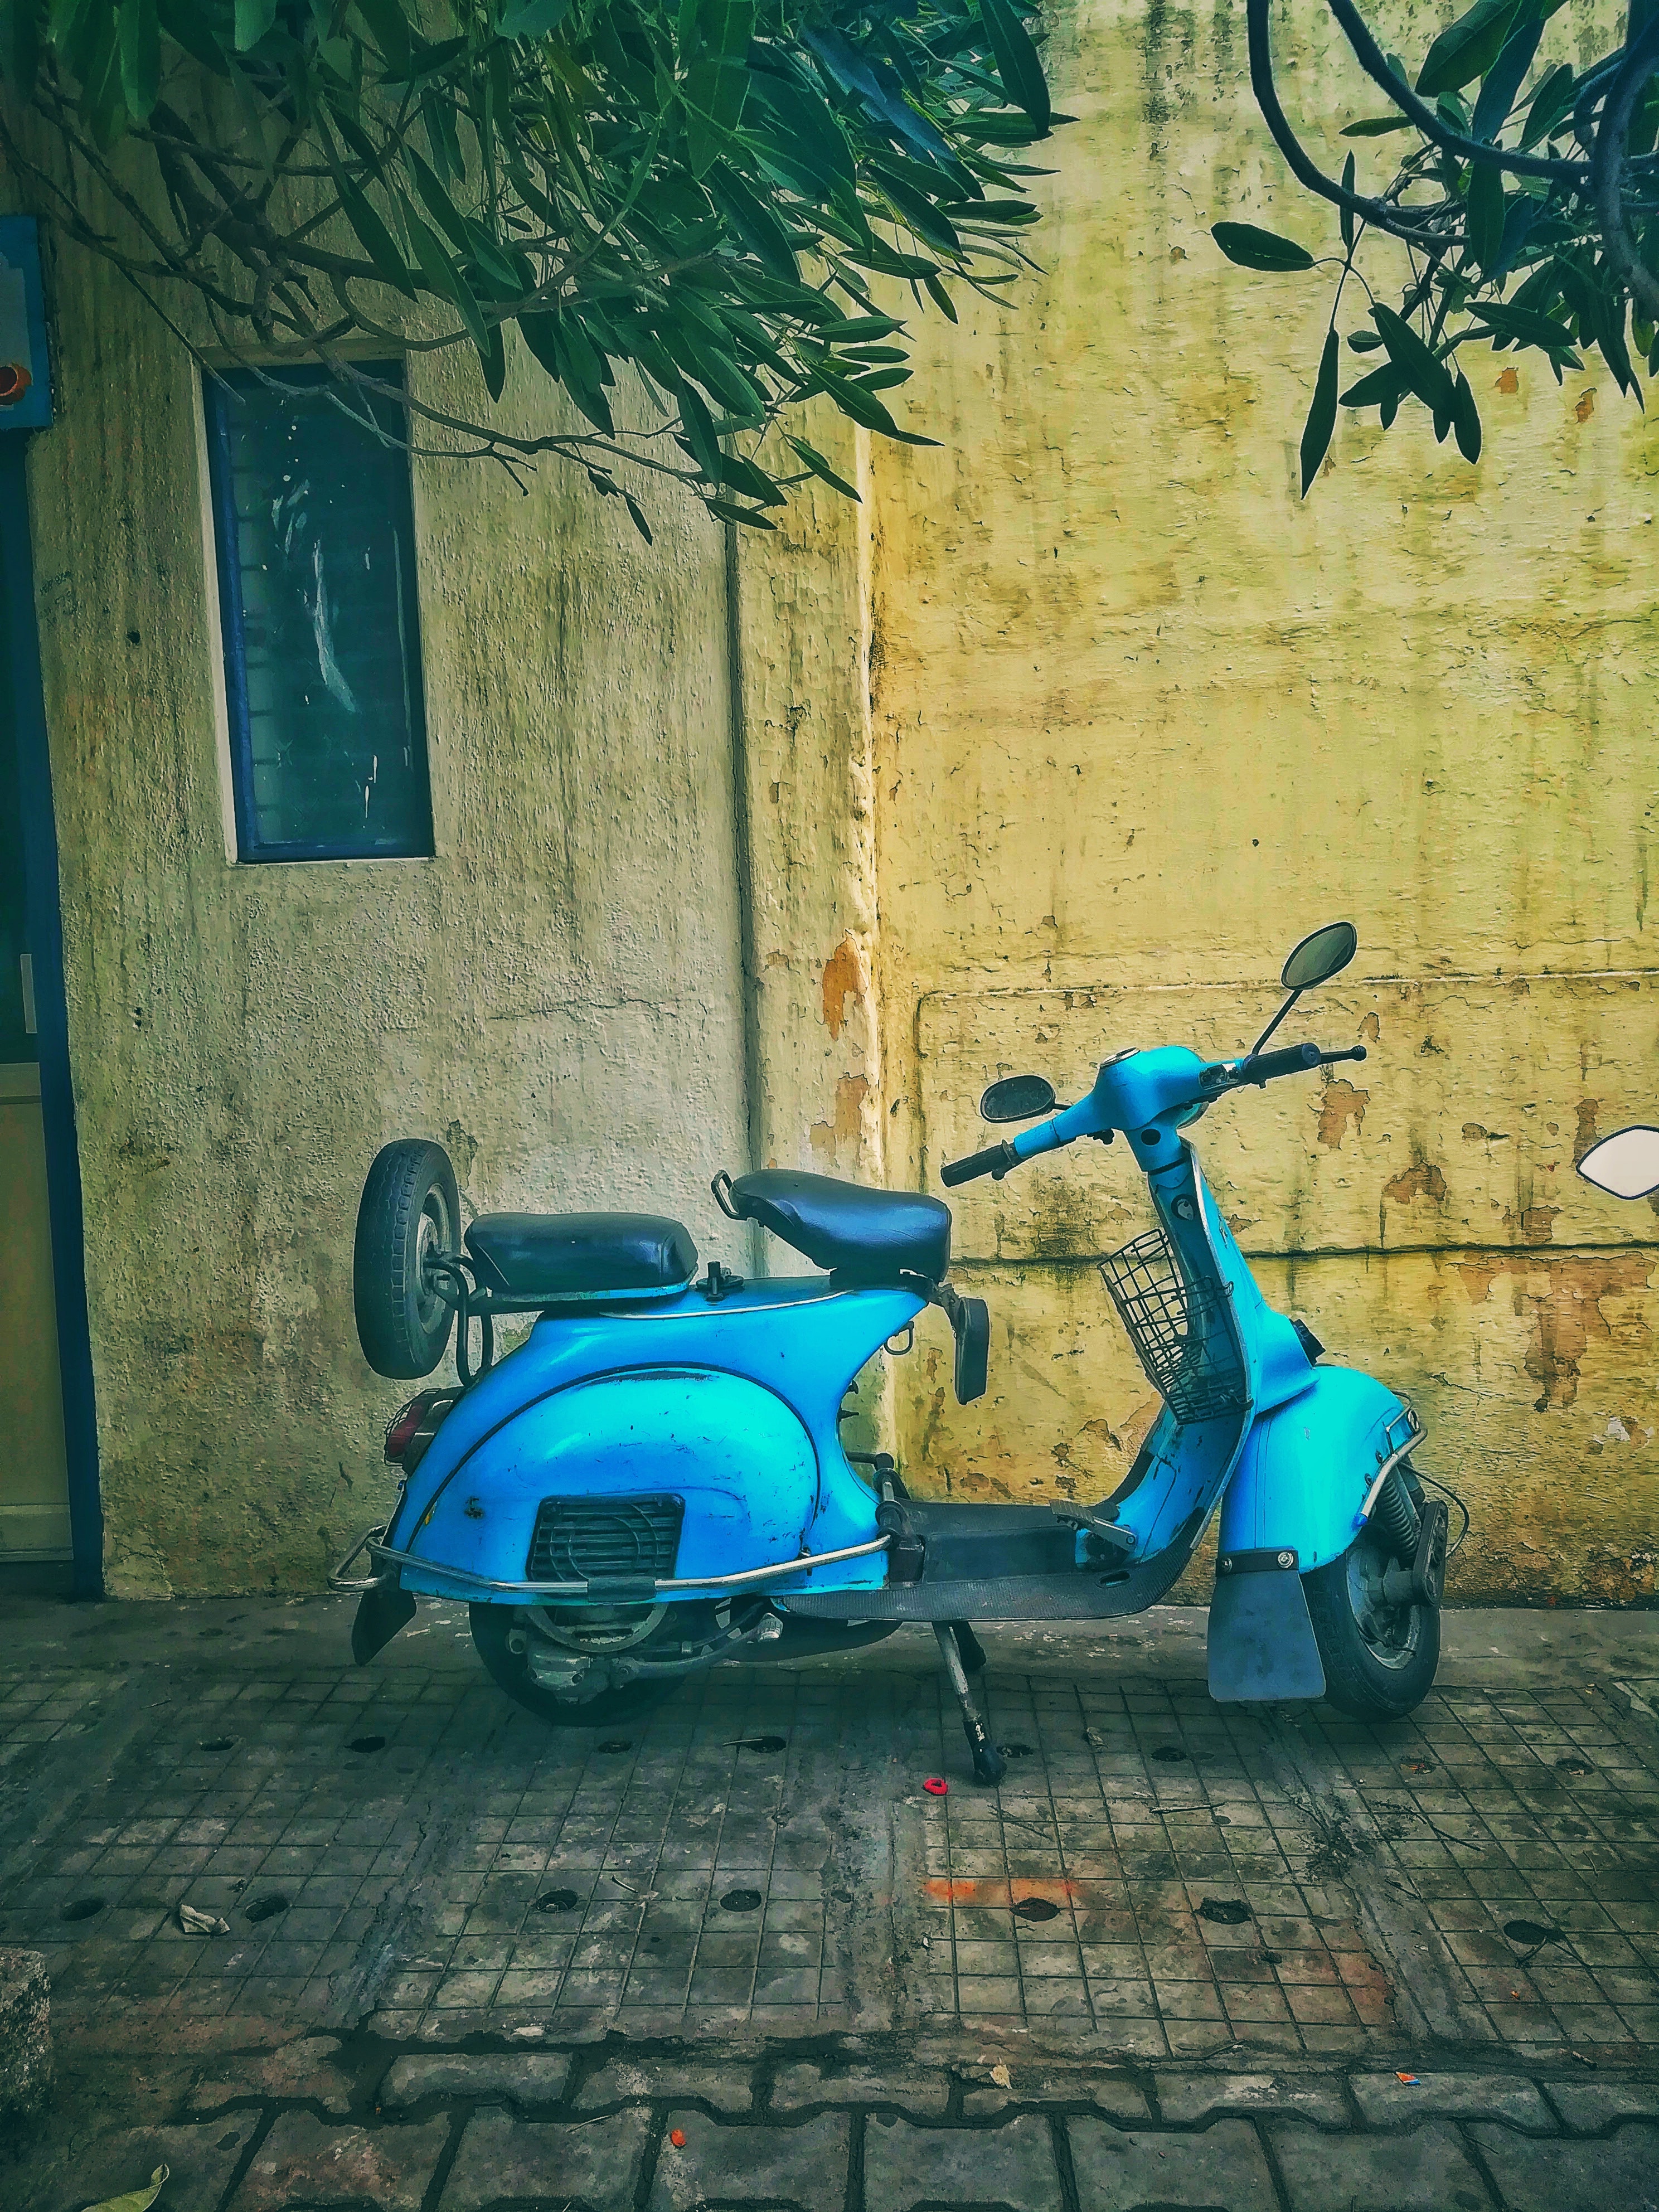 Teal Motor Scooter on Road, Bike, Scooter, Wall, Vintage, HQ Photo